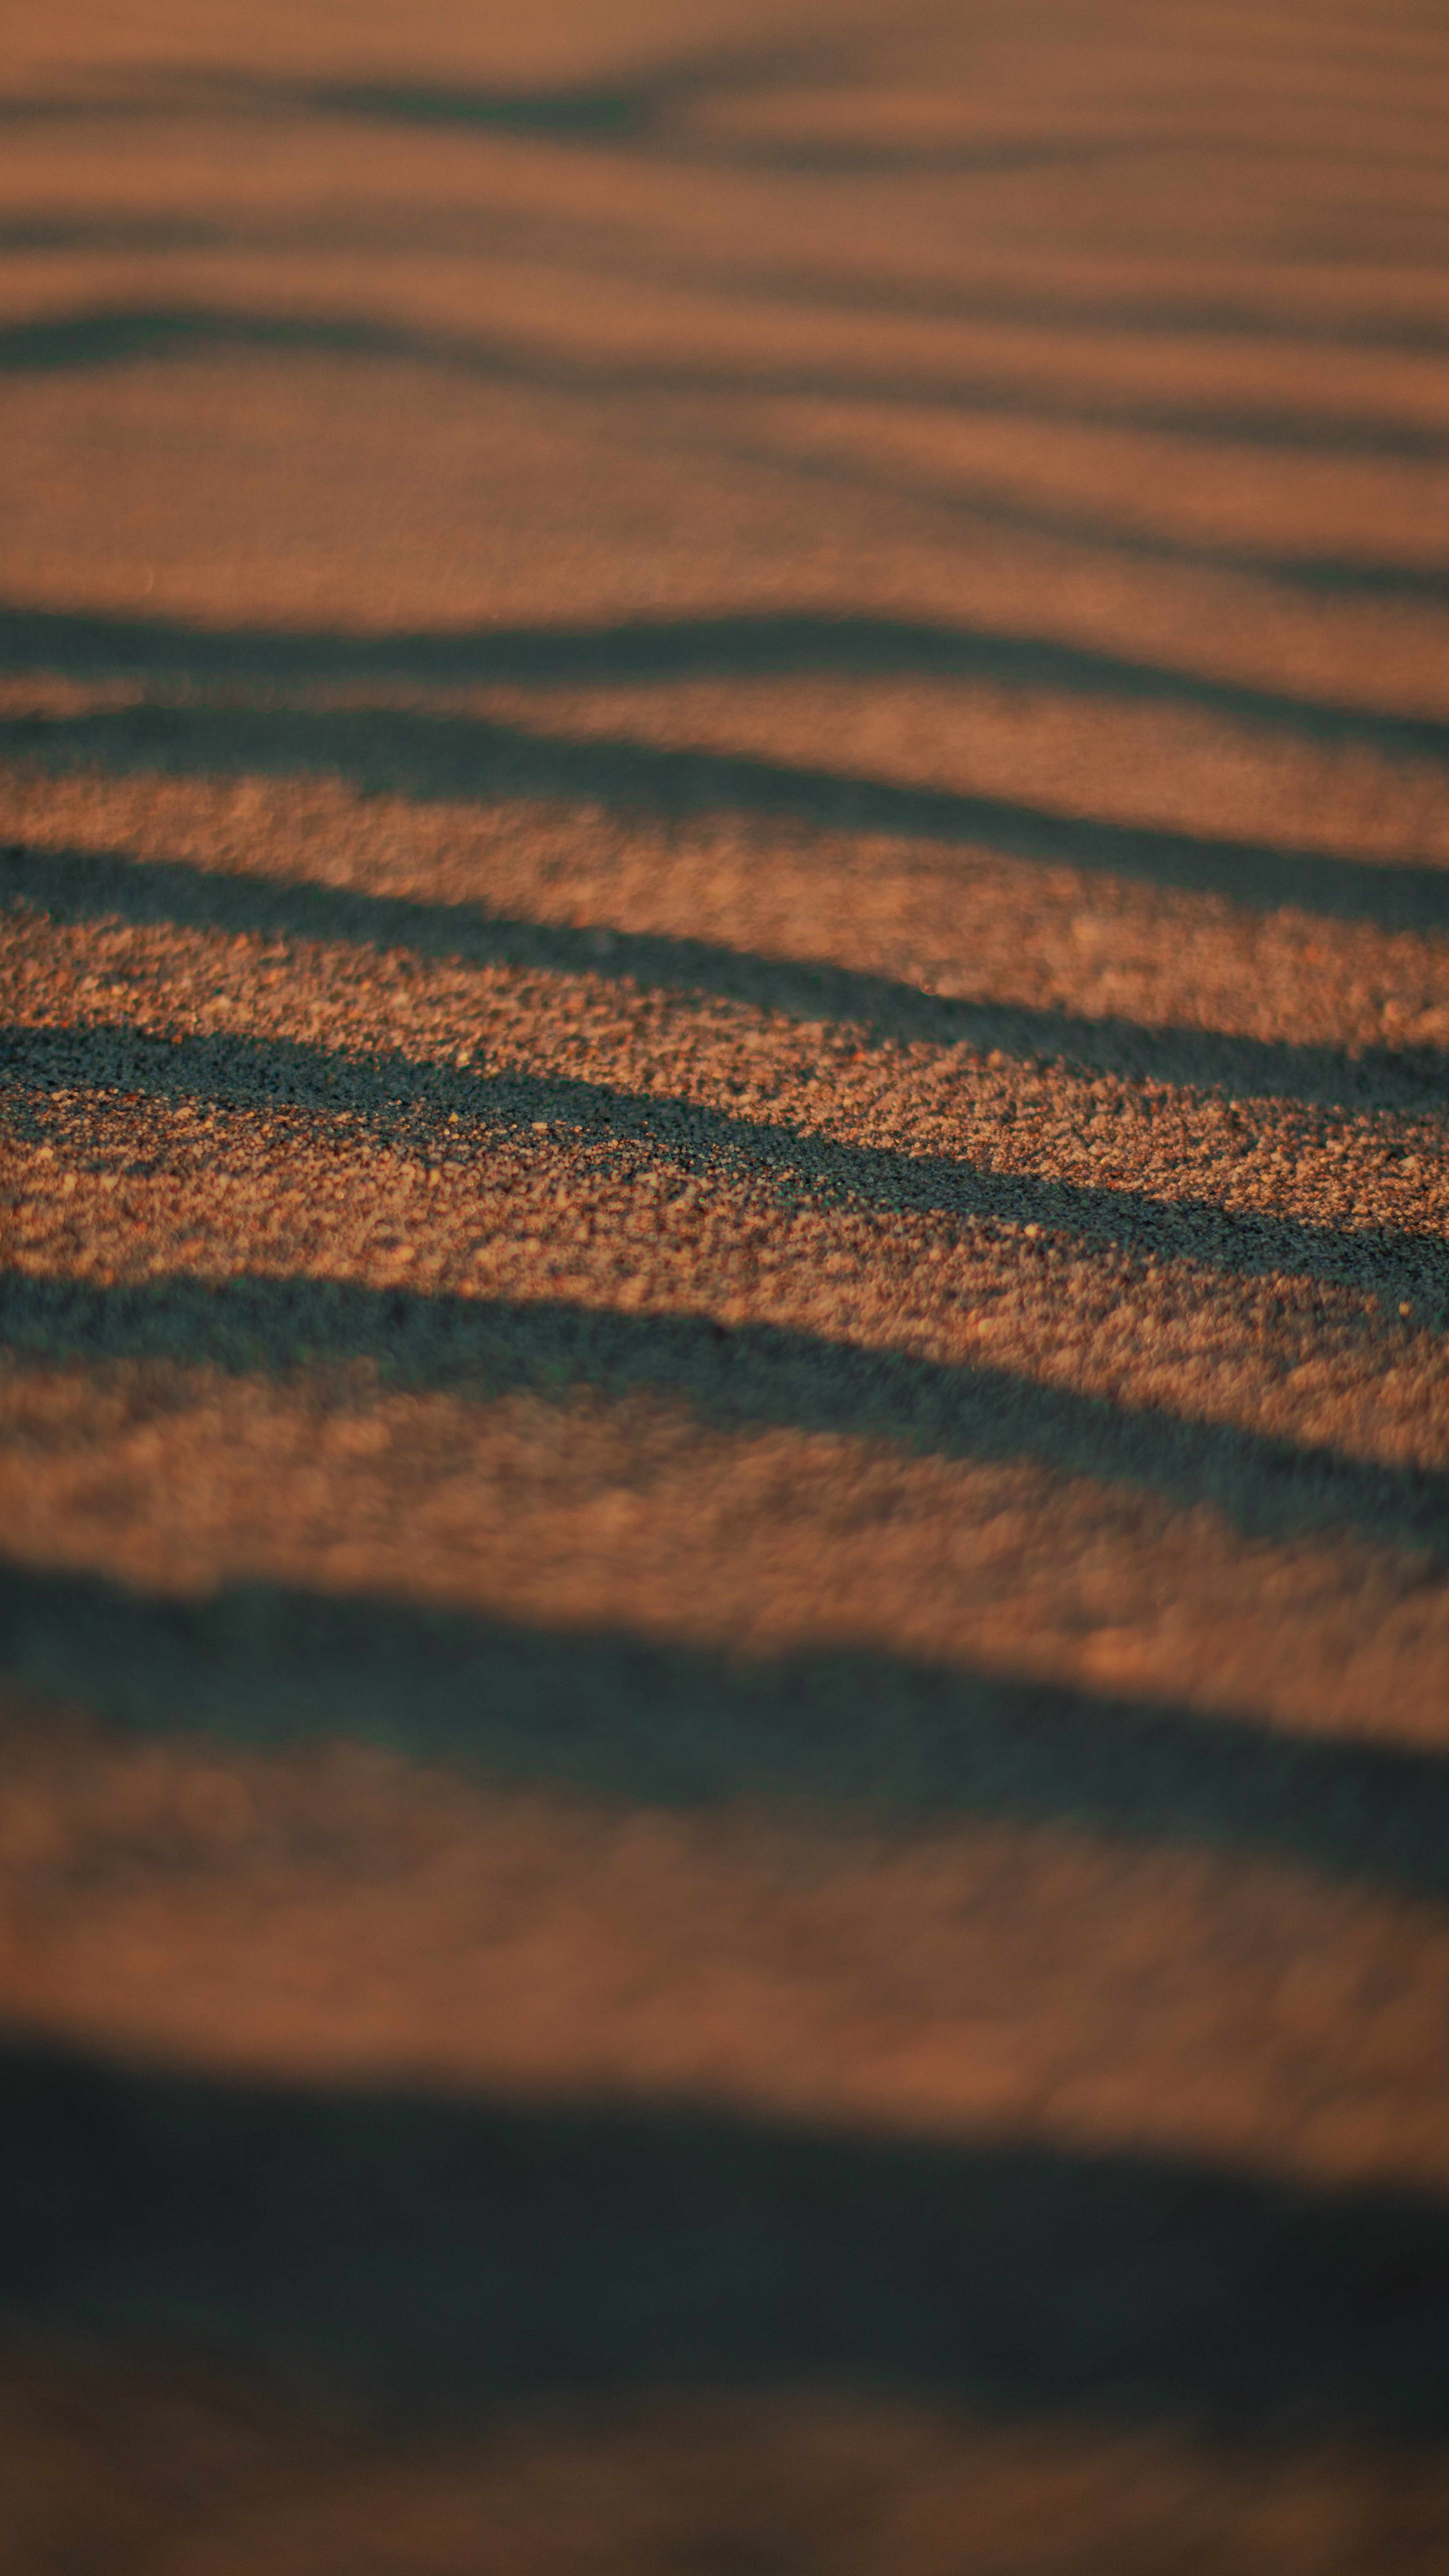 122660 download wallpaper waves, sand, macro, brown, surface screensavers and pictures for free